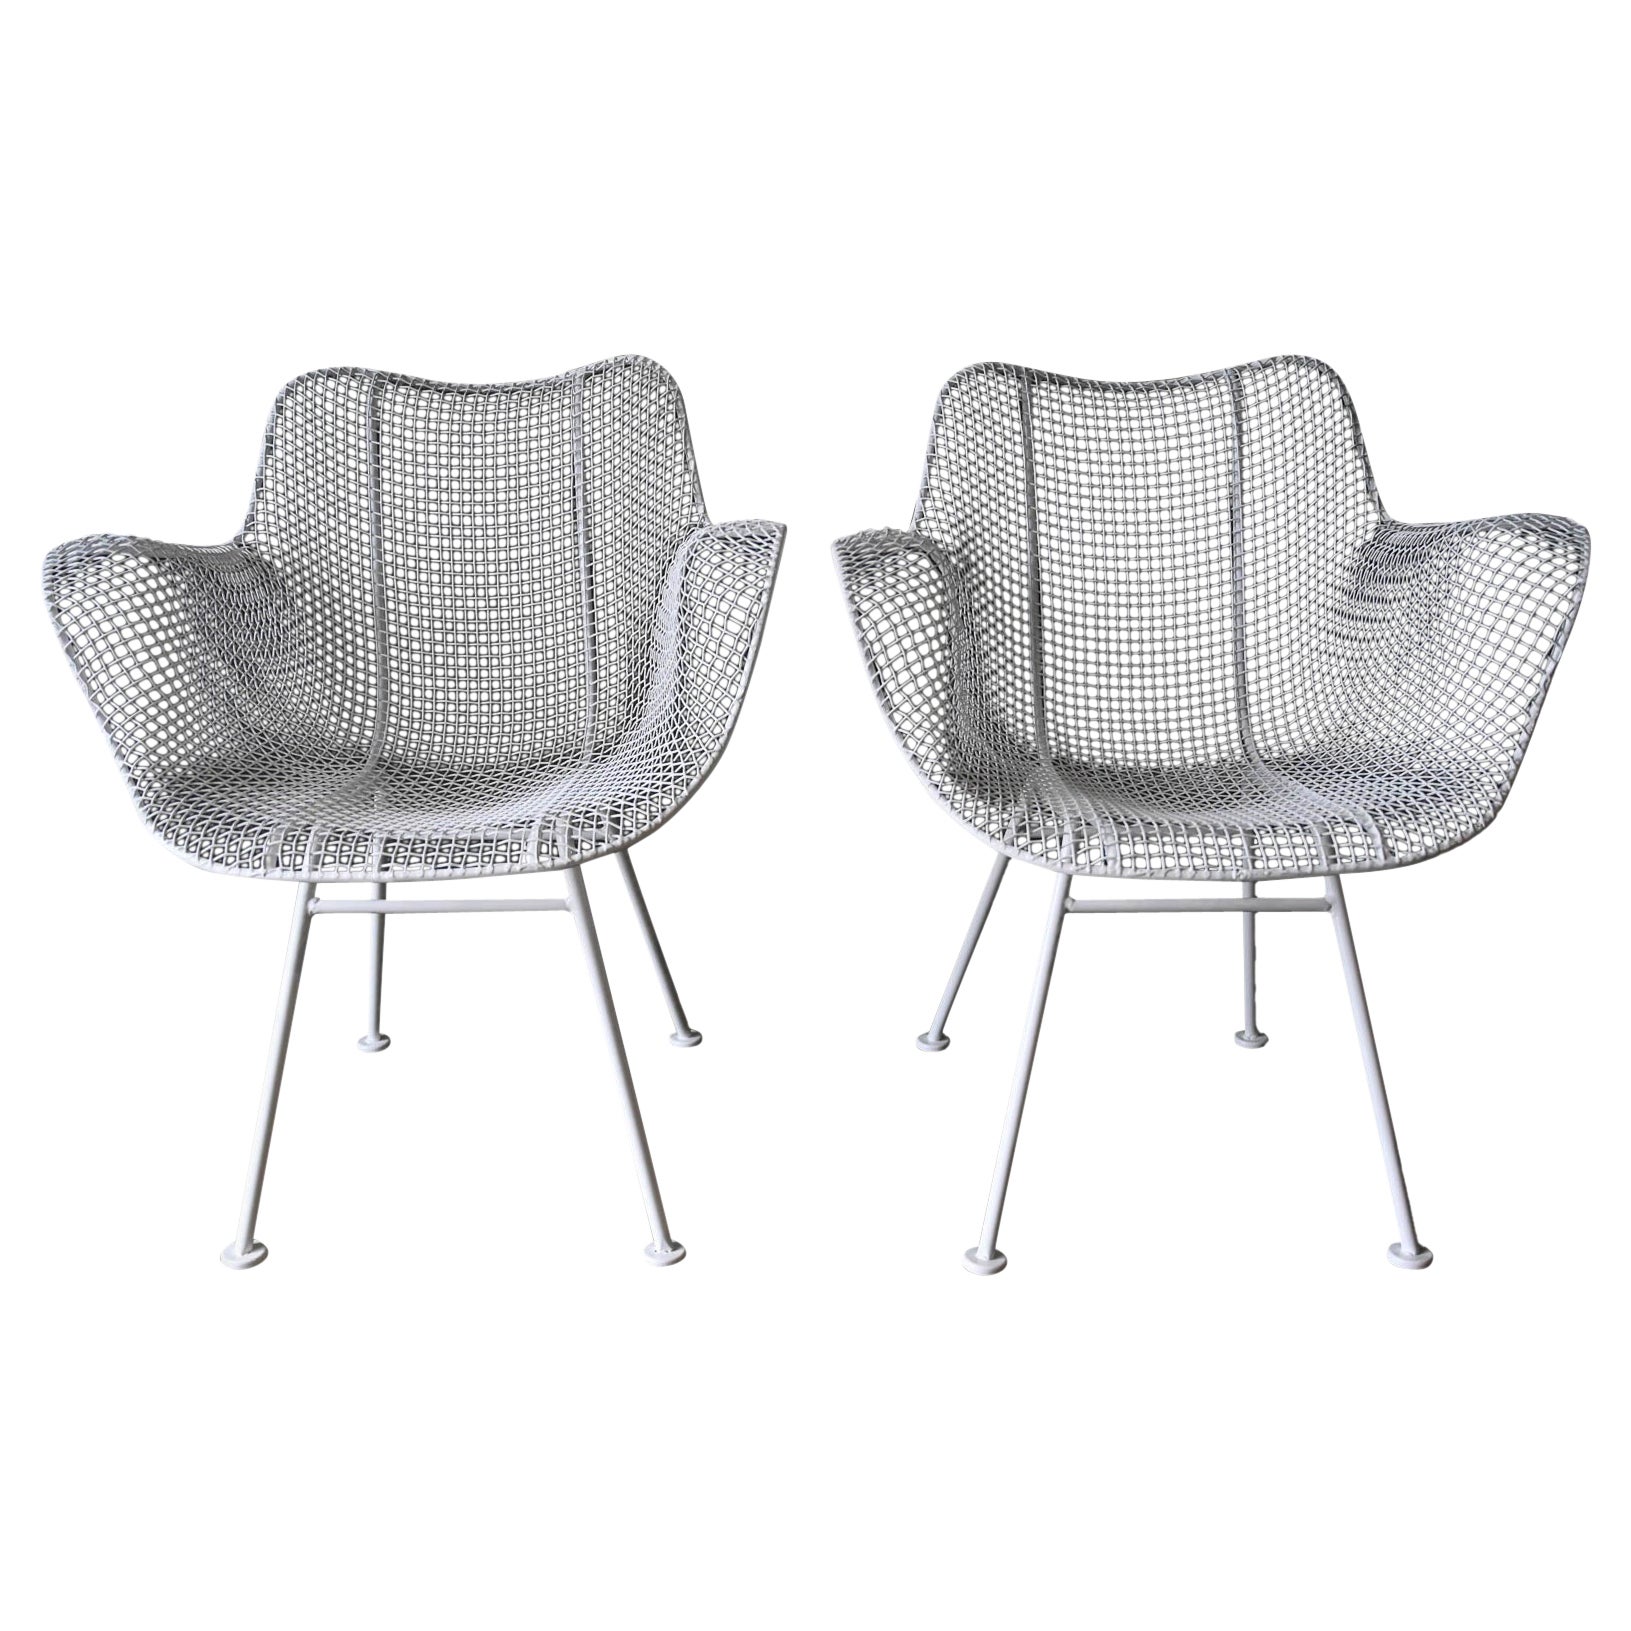 Pair of Russell Woodard Sculptura Outdoor Chairs, ca. 1950 For Sale